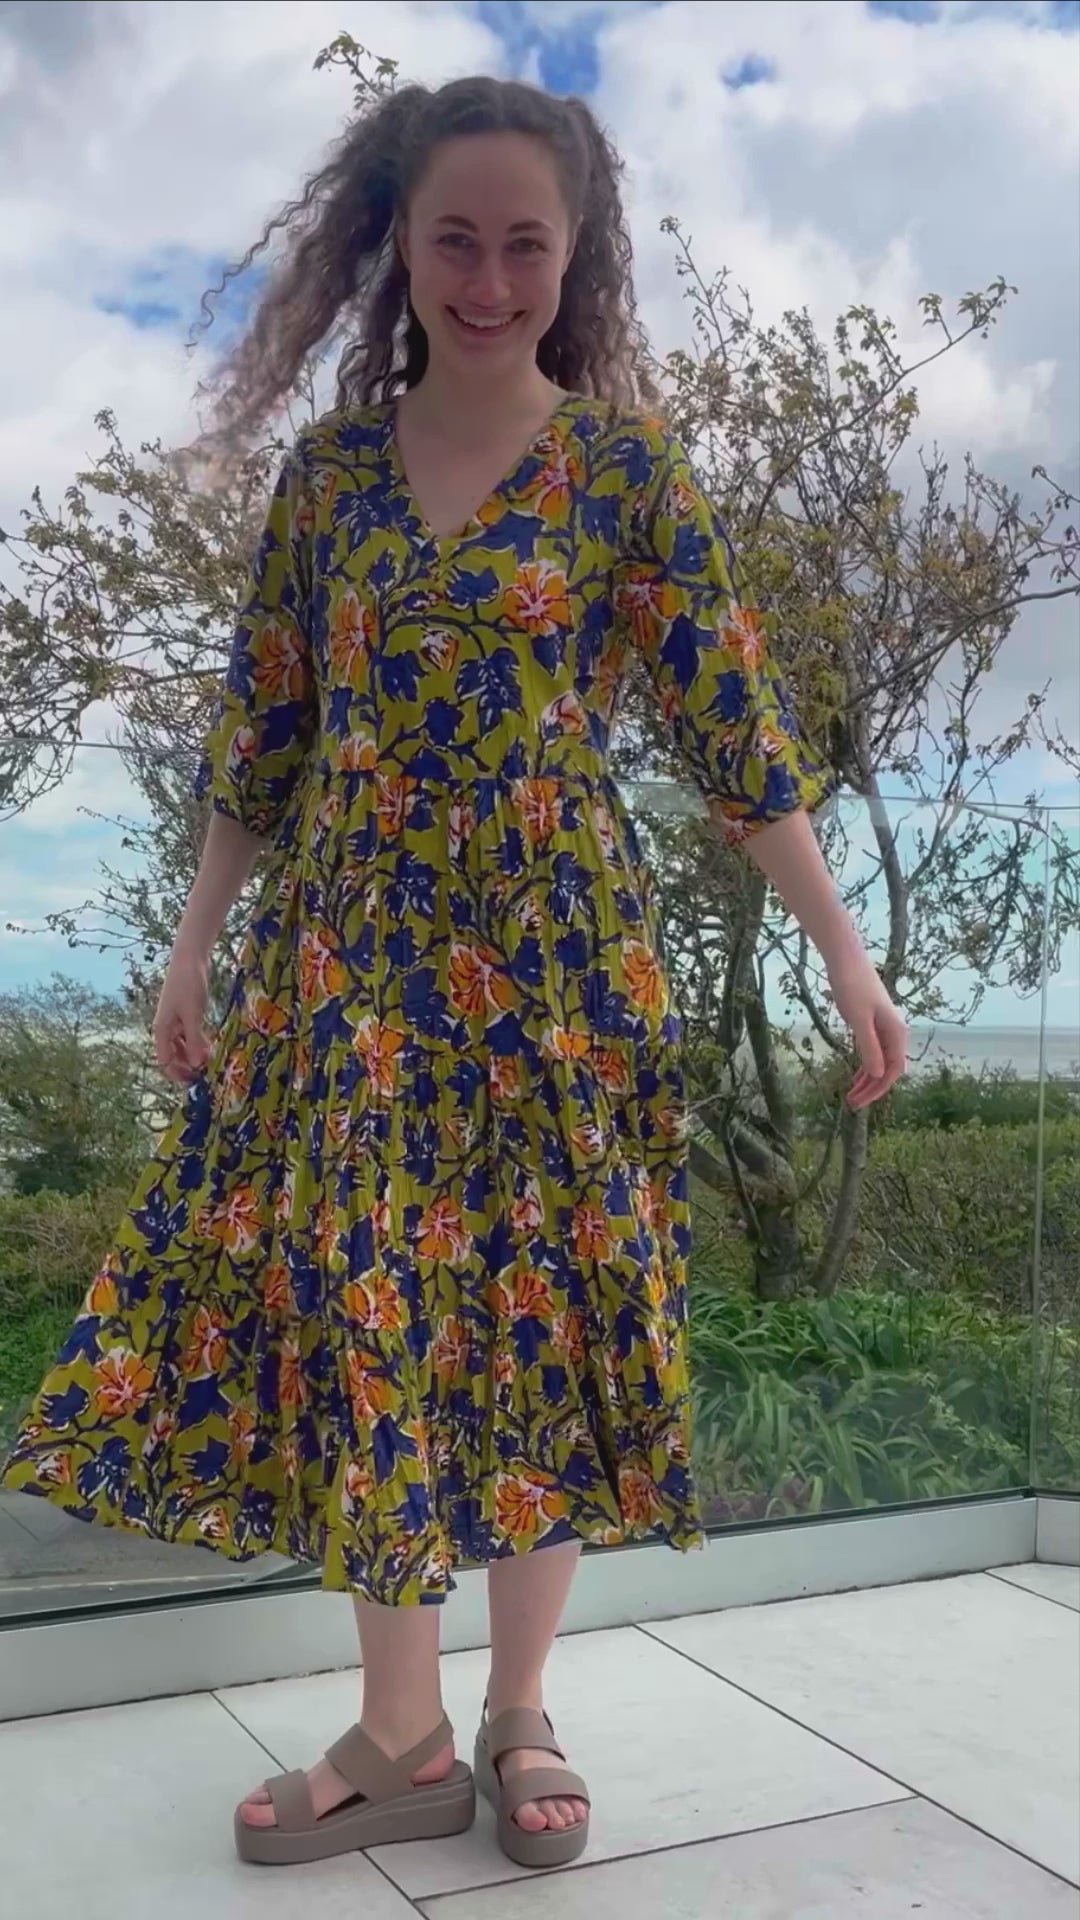 midi cotton floral dress with tiered skirt, elbow length sleeves, v neckline, olive background with indigo and orange florals